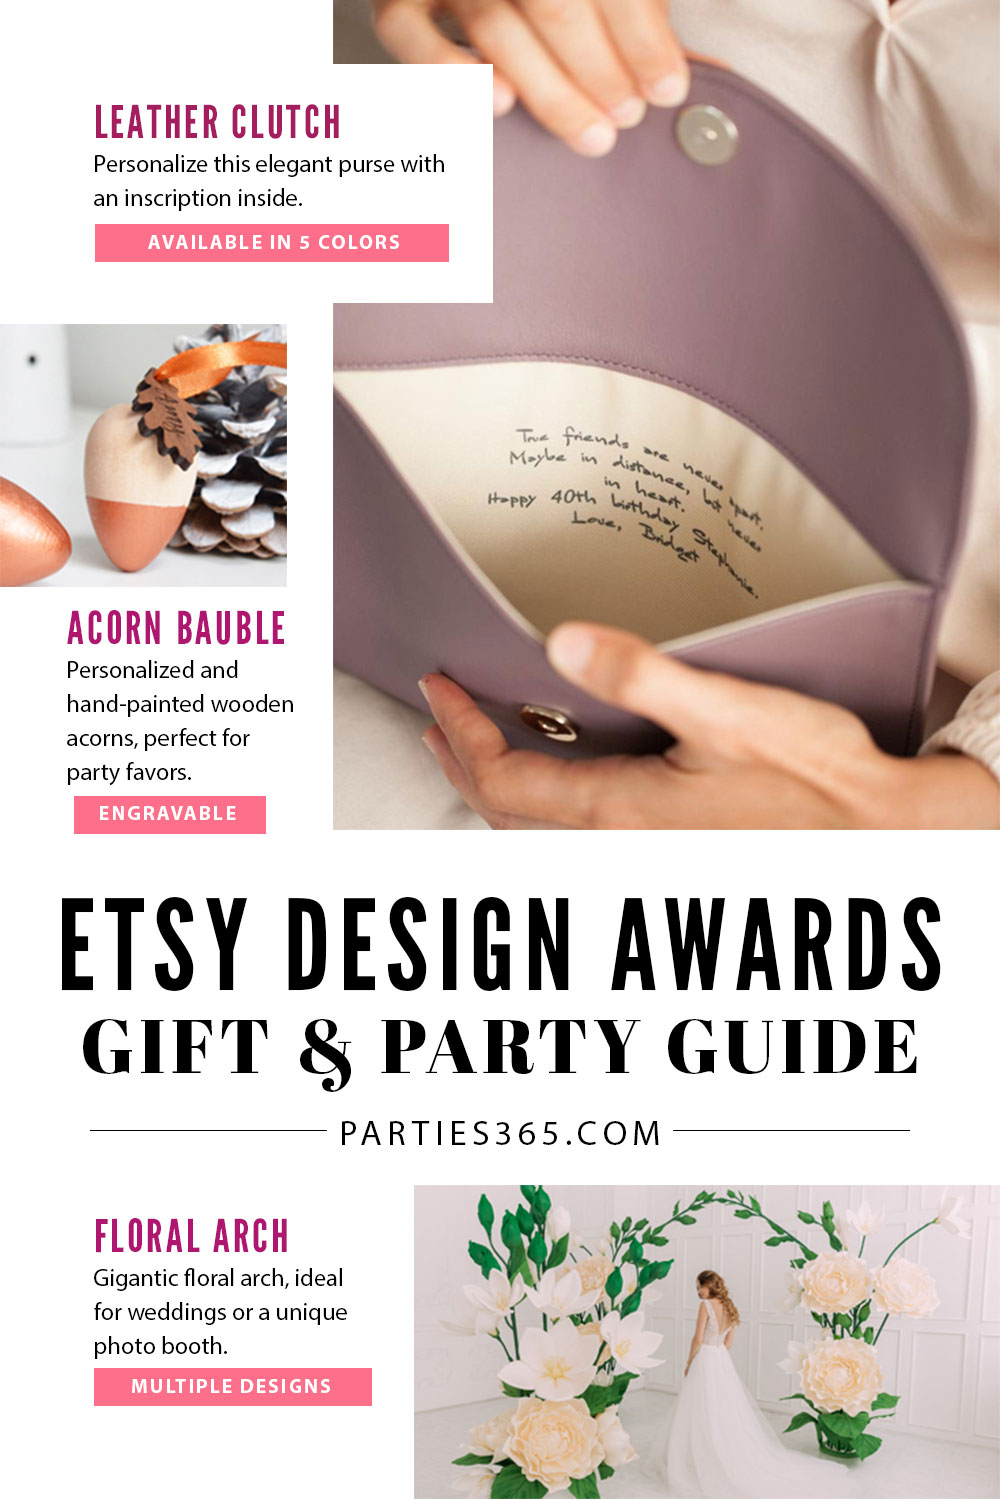 Searching for unique gift ideas and party decor? Here are 8 ideas from the Etsy Design Awards finalists that will inspire the perfect gift for her and give your party the wow factor! #TheEtsies #giftguide #giftideas #partydecor #partysupplies